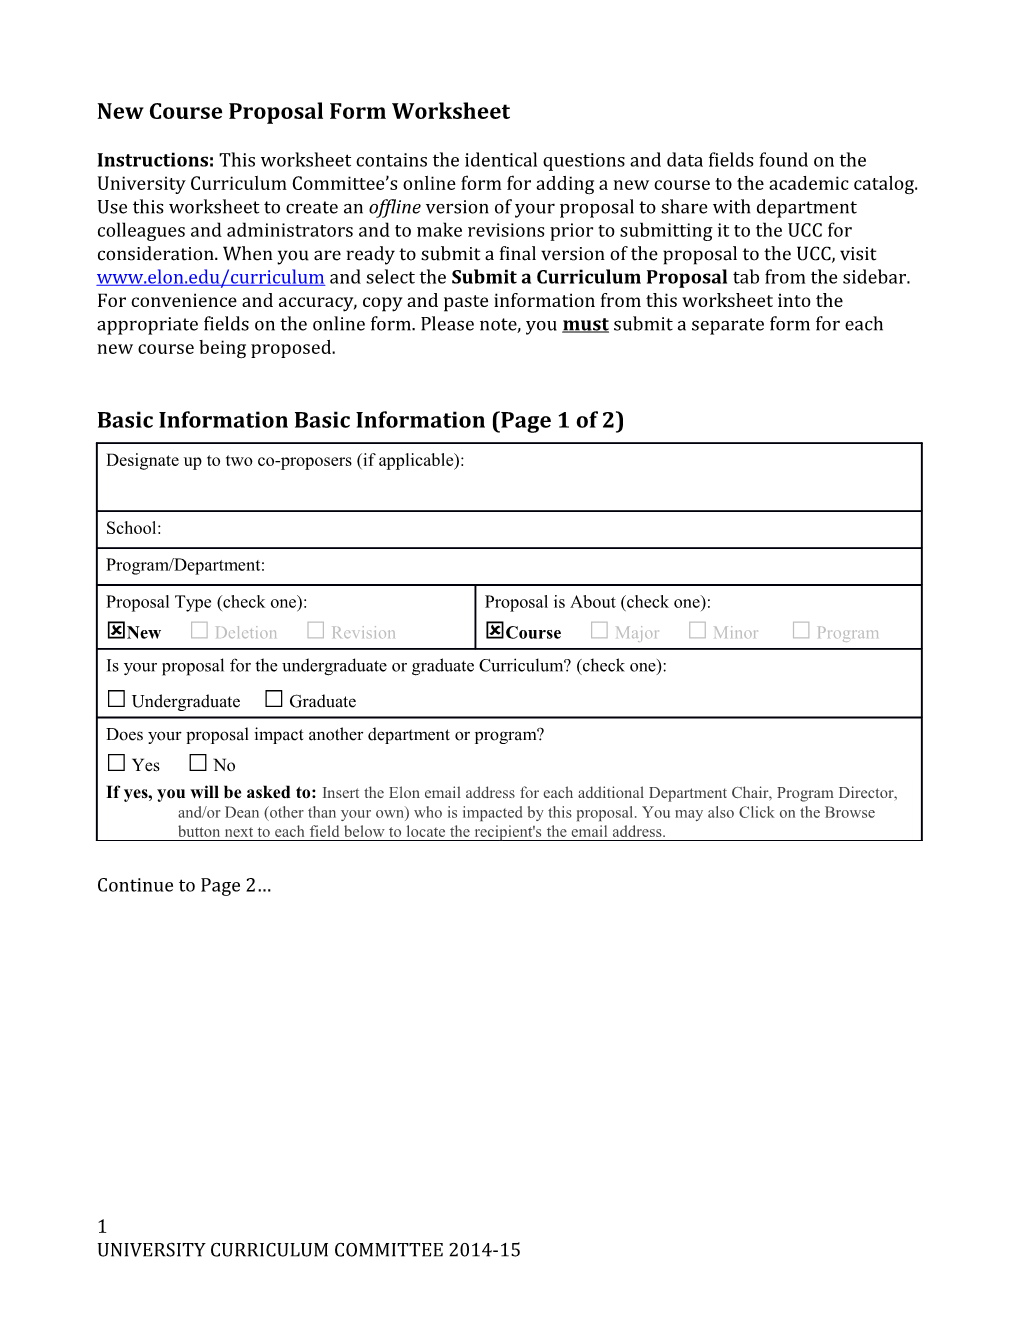 New Course Proposal Form Worksheet